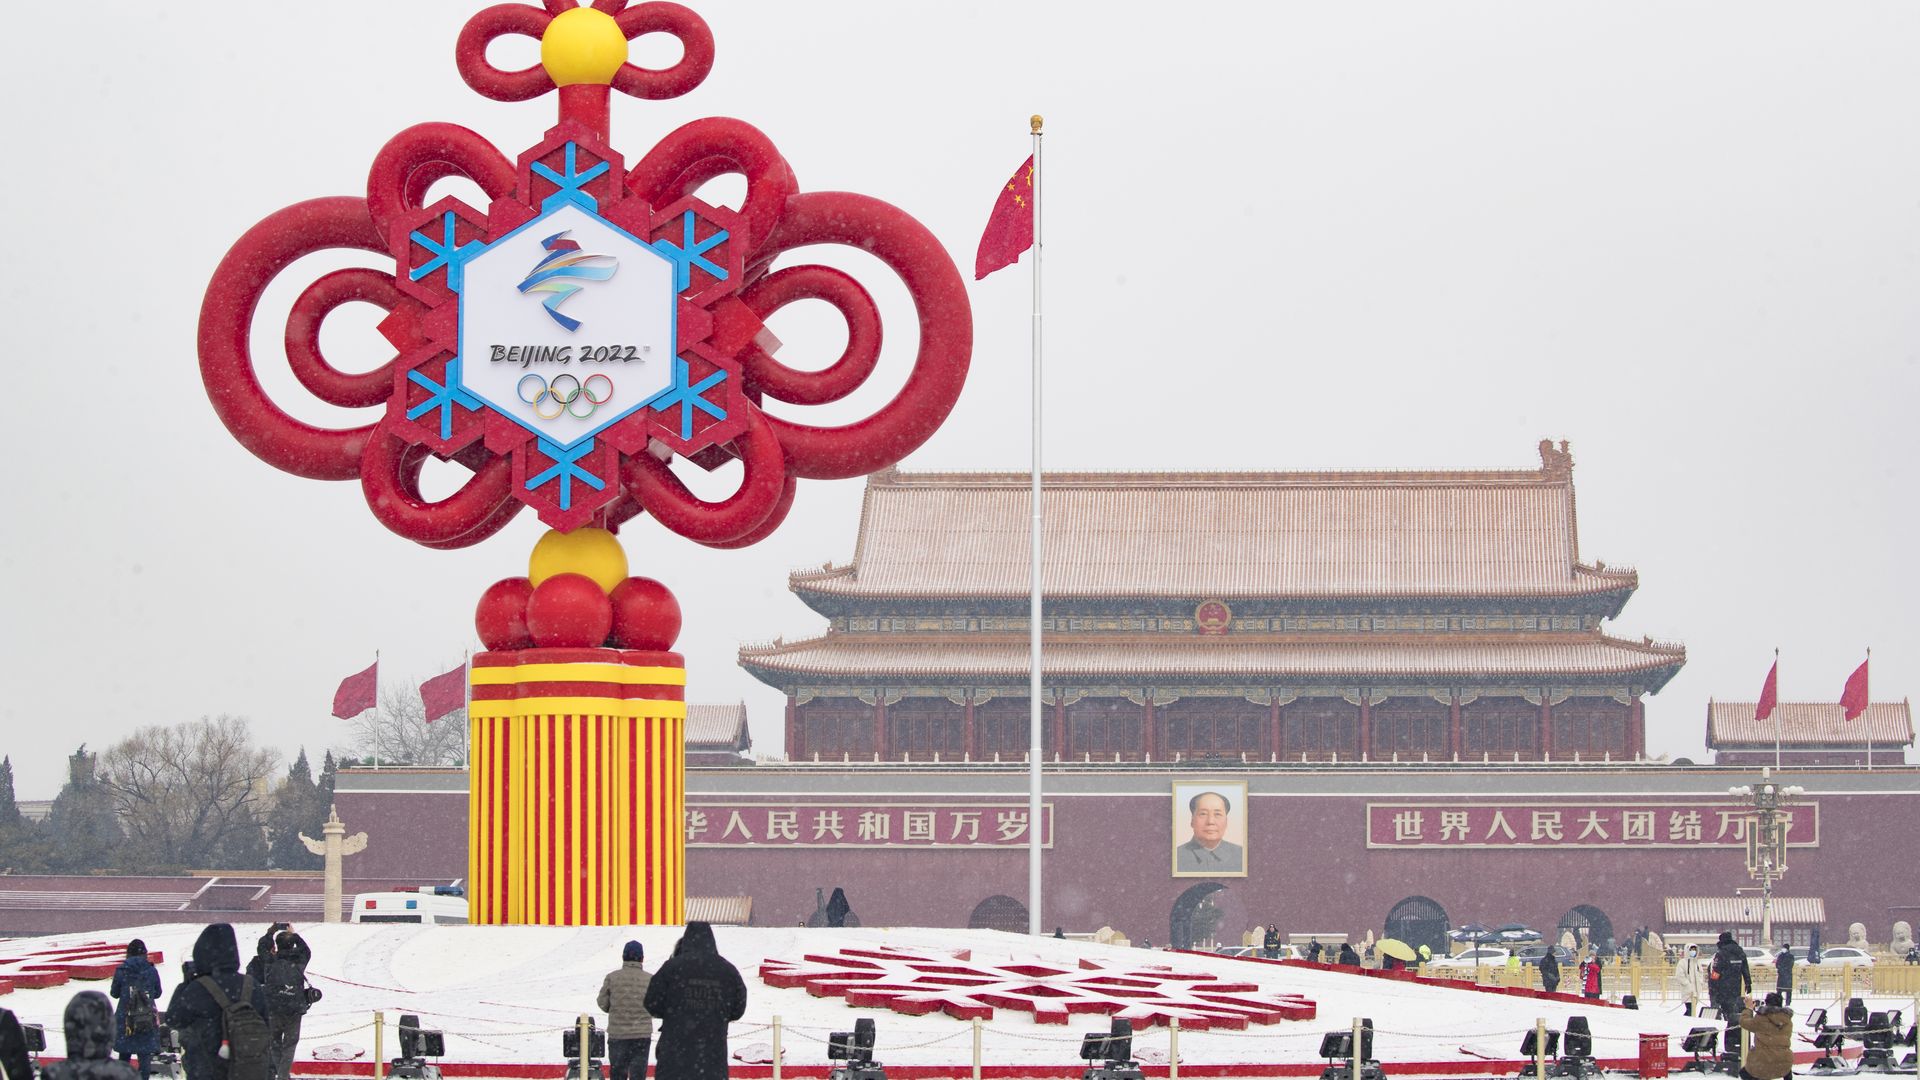  Winter Olympics-themed Chinese knot is seen at Tian'anmen Square on a snowy day on January 20, 2022 in Beijing, China